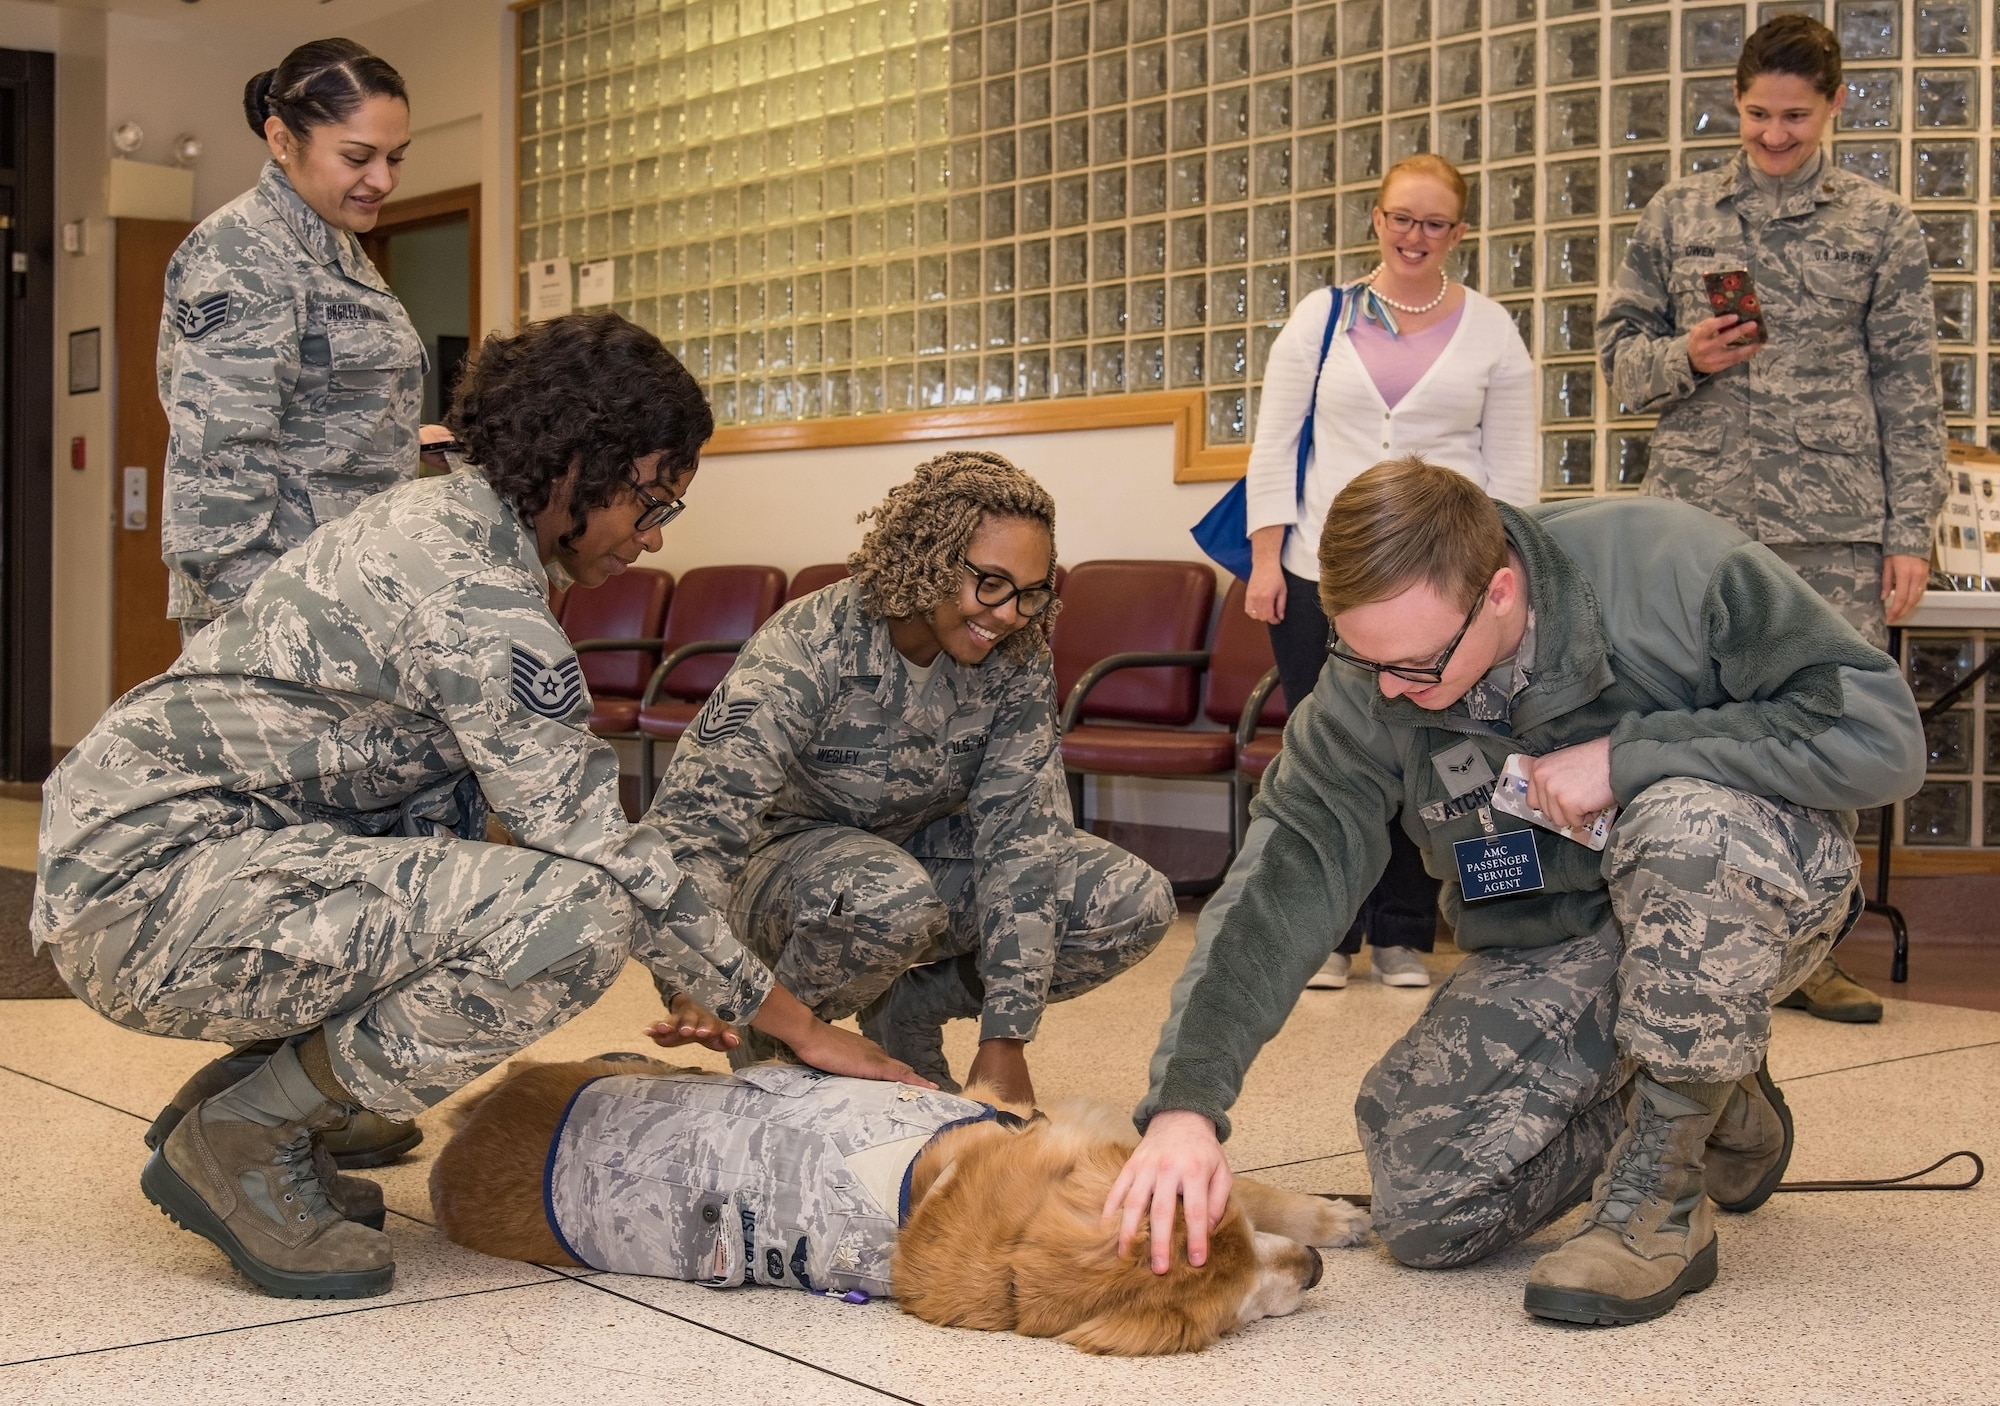 Maj. Regina Owen, 436th Medical Operations Squadron psychiatric mental health nurse practitioner, and Jennifer Houseman, 436th MDOS Family Advocacy program assistant, both top right, watch Team Dover members pet and talk to U.S. Air Force therapy dog Lt. Col. Goldie, a nine-year-old Golden Retriever, Oct. 19, 2017, in the passenger terminal on Dover Air Force Base, Del. Goldie is stationed at Walter Reed National Military Medical Center, Bethesda, Md., and was part of Family Advocacy’s Domestic Violence Awareness Month outreach by going around the base meeting Team Dover personnel. (U.S. Air Force photo by Roland Balik)